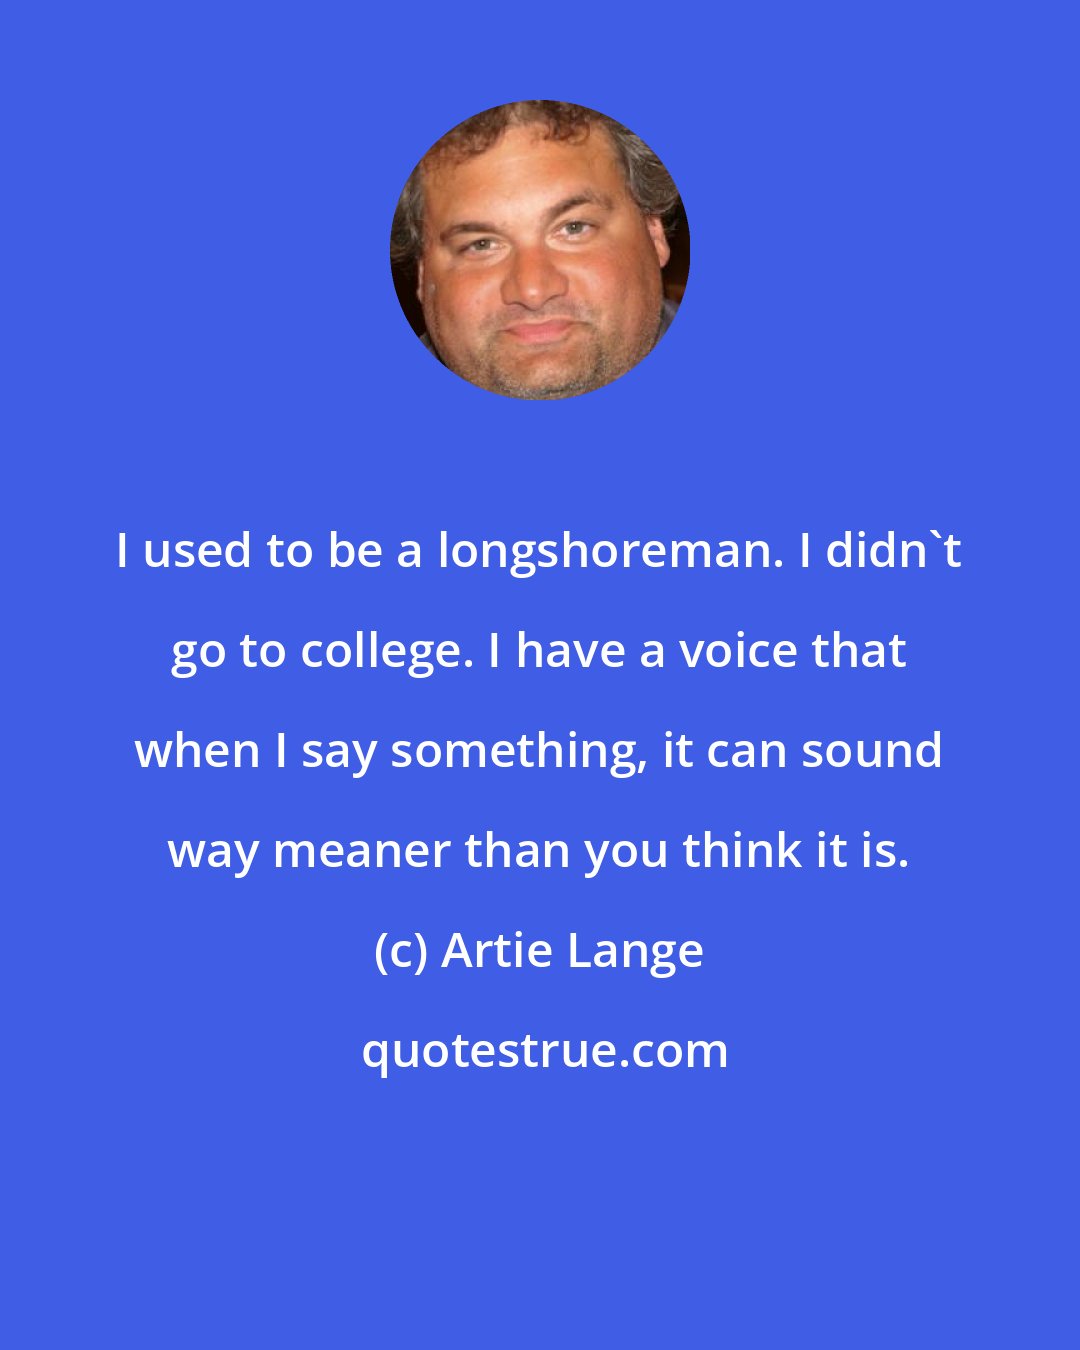 Artie Lange: I used to be a longshoreman. I didn't go to college. I have a voice that when I say something, it can sound way meaner than you think it is.